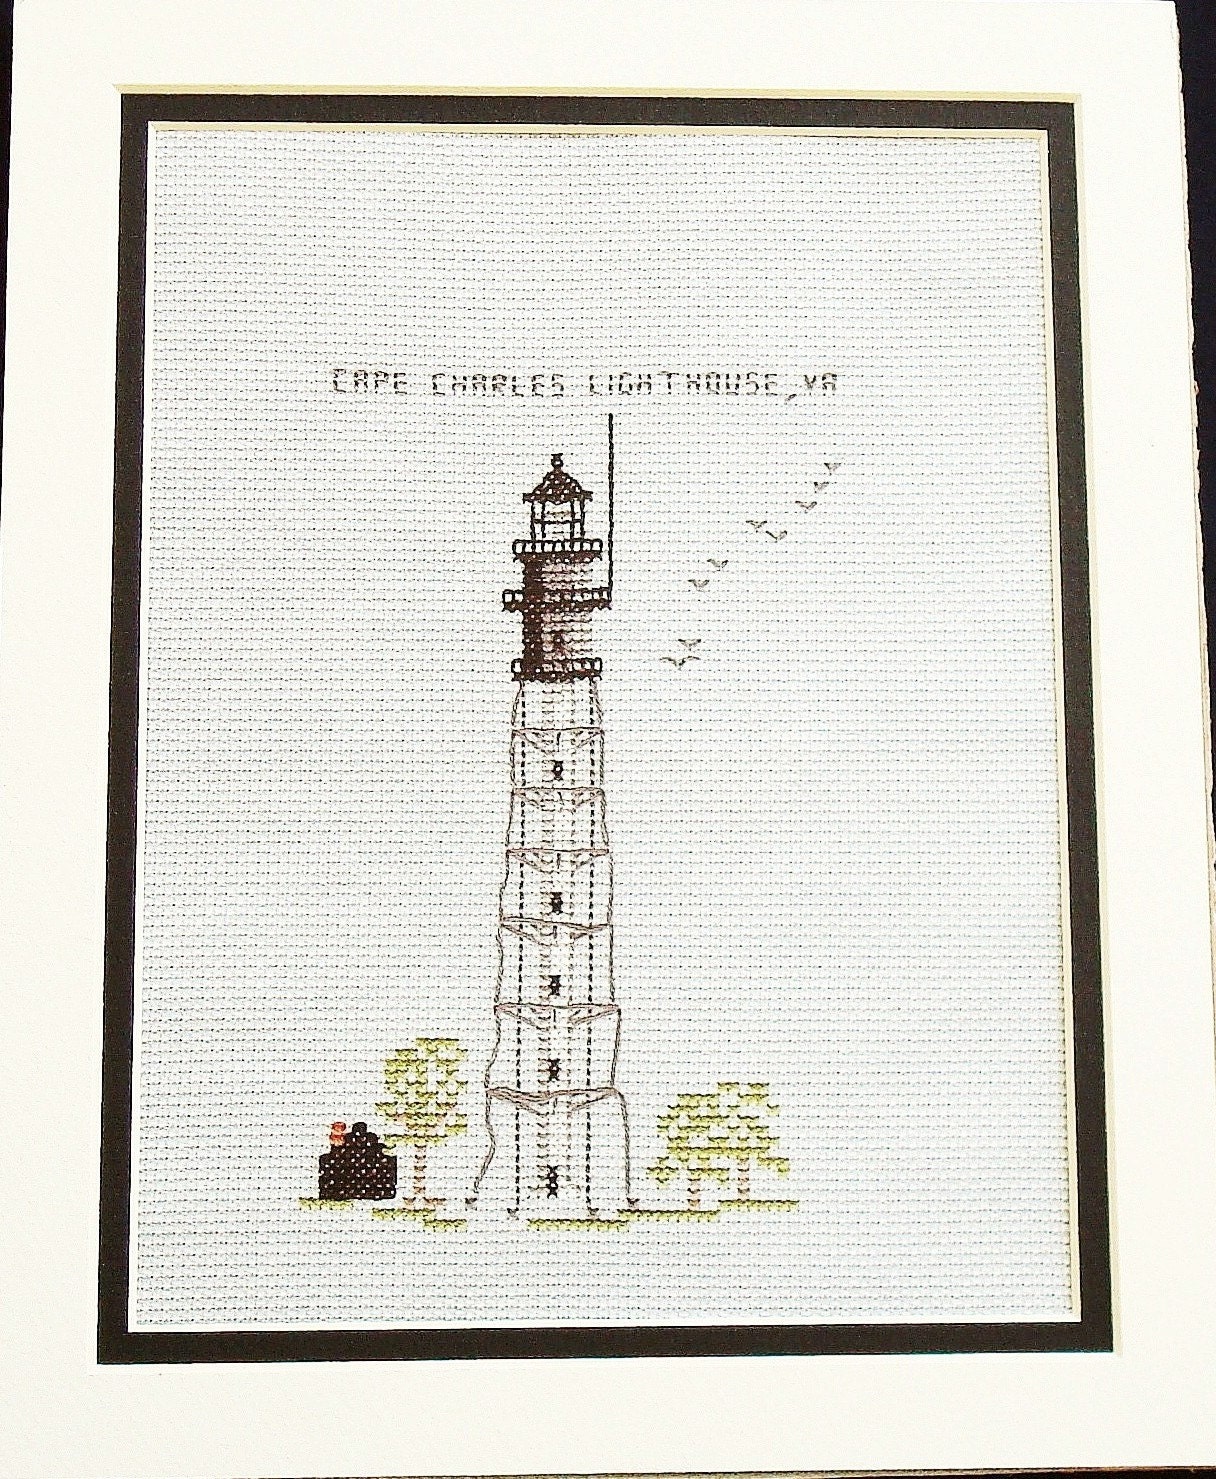 cape charles lighthouse